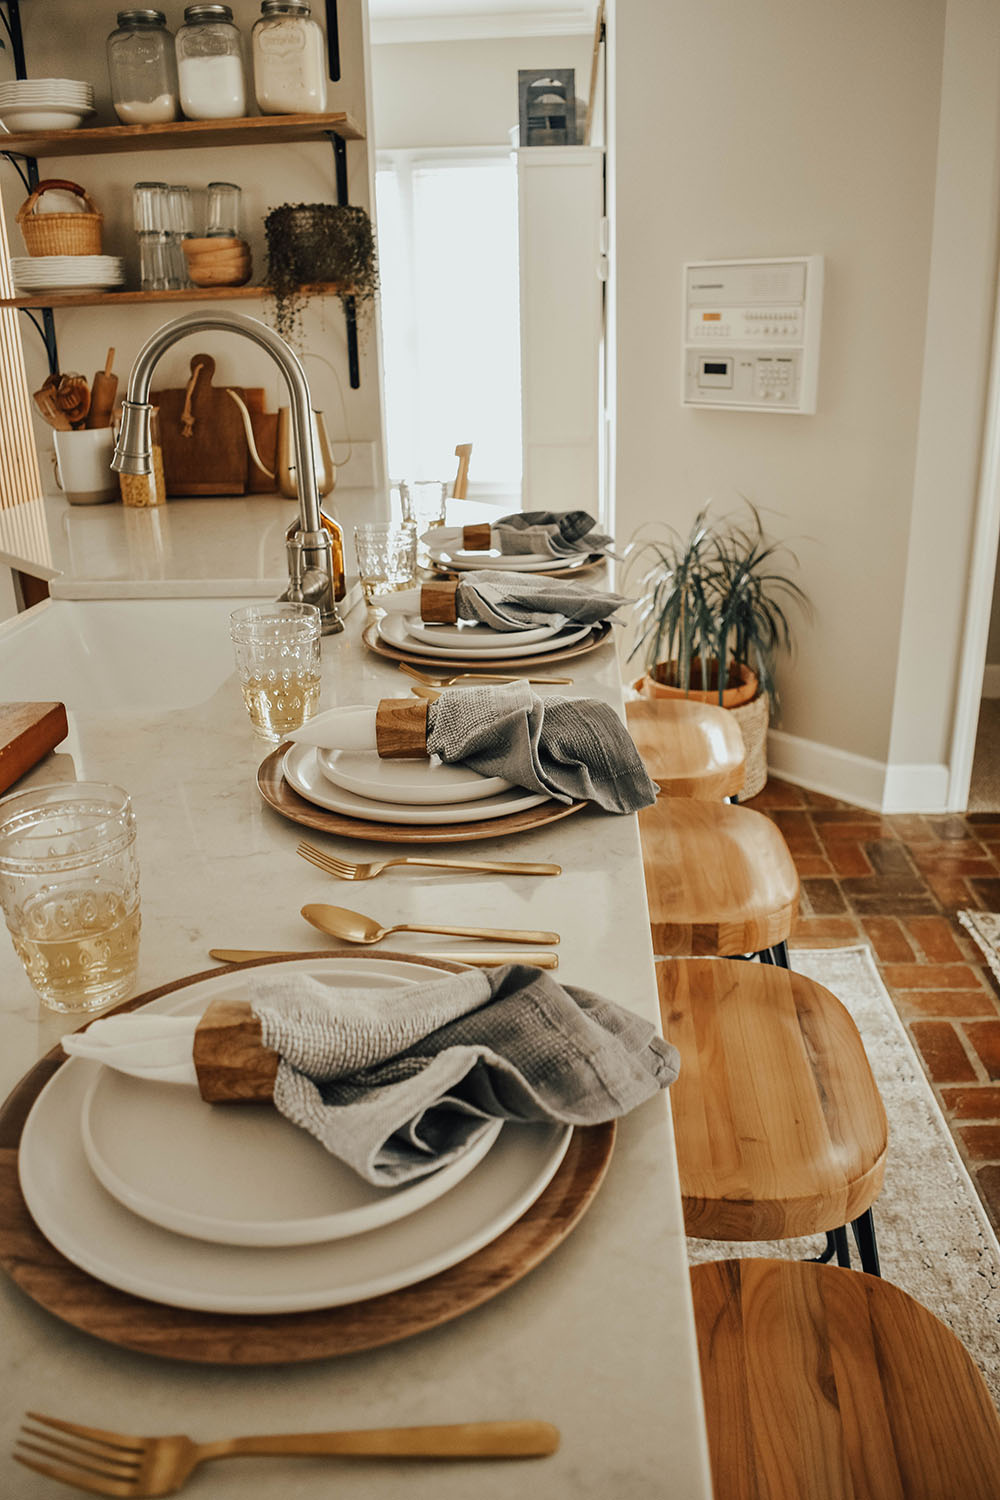 A kitchen island with place settings for a Friendsgiving dinner.